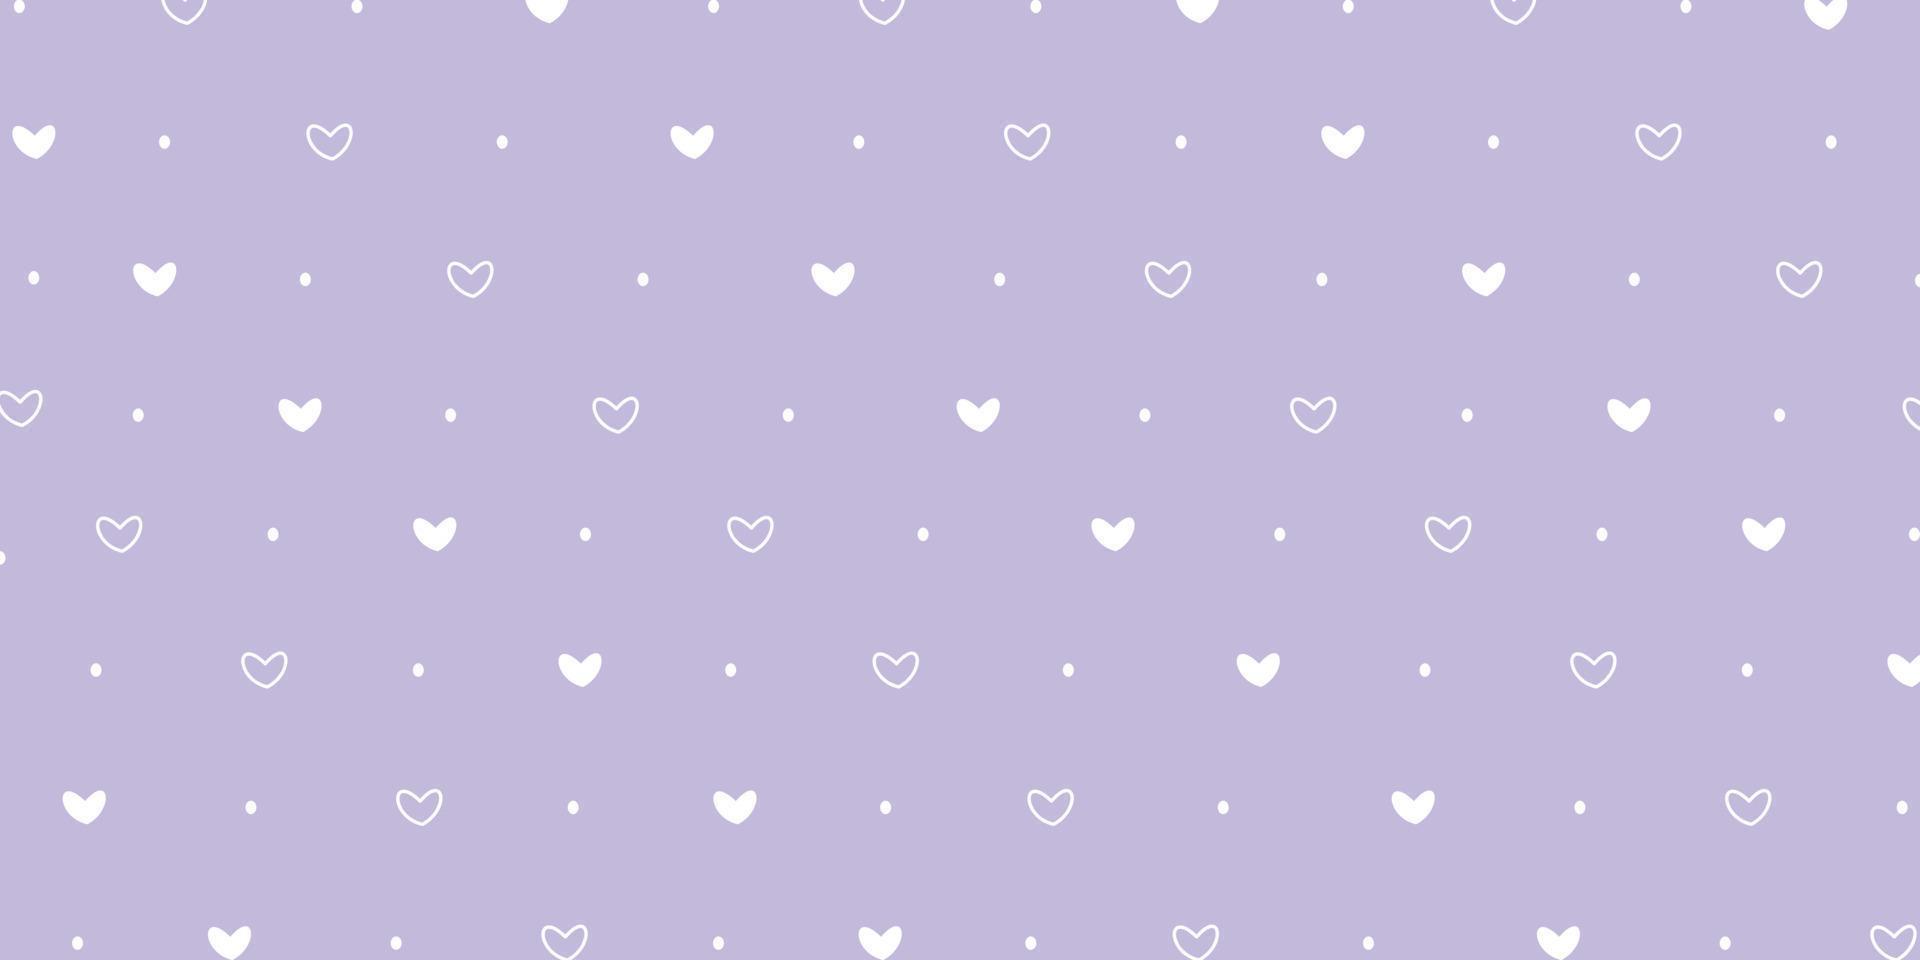 Minimalist love shape pattern in purple for background. Abstract simple and cute girls wallpaper design theme vector